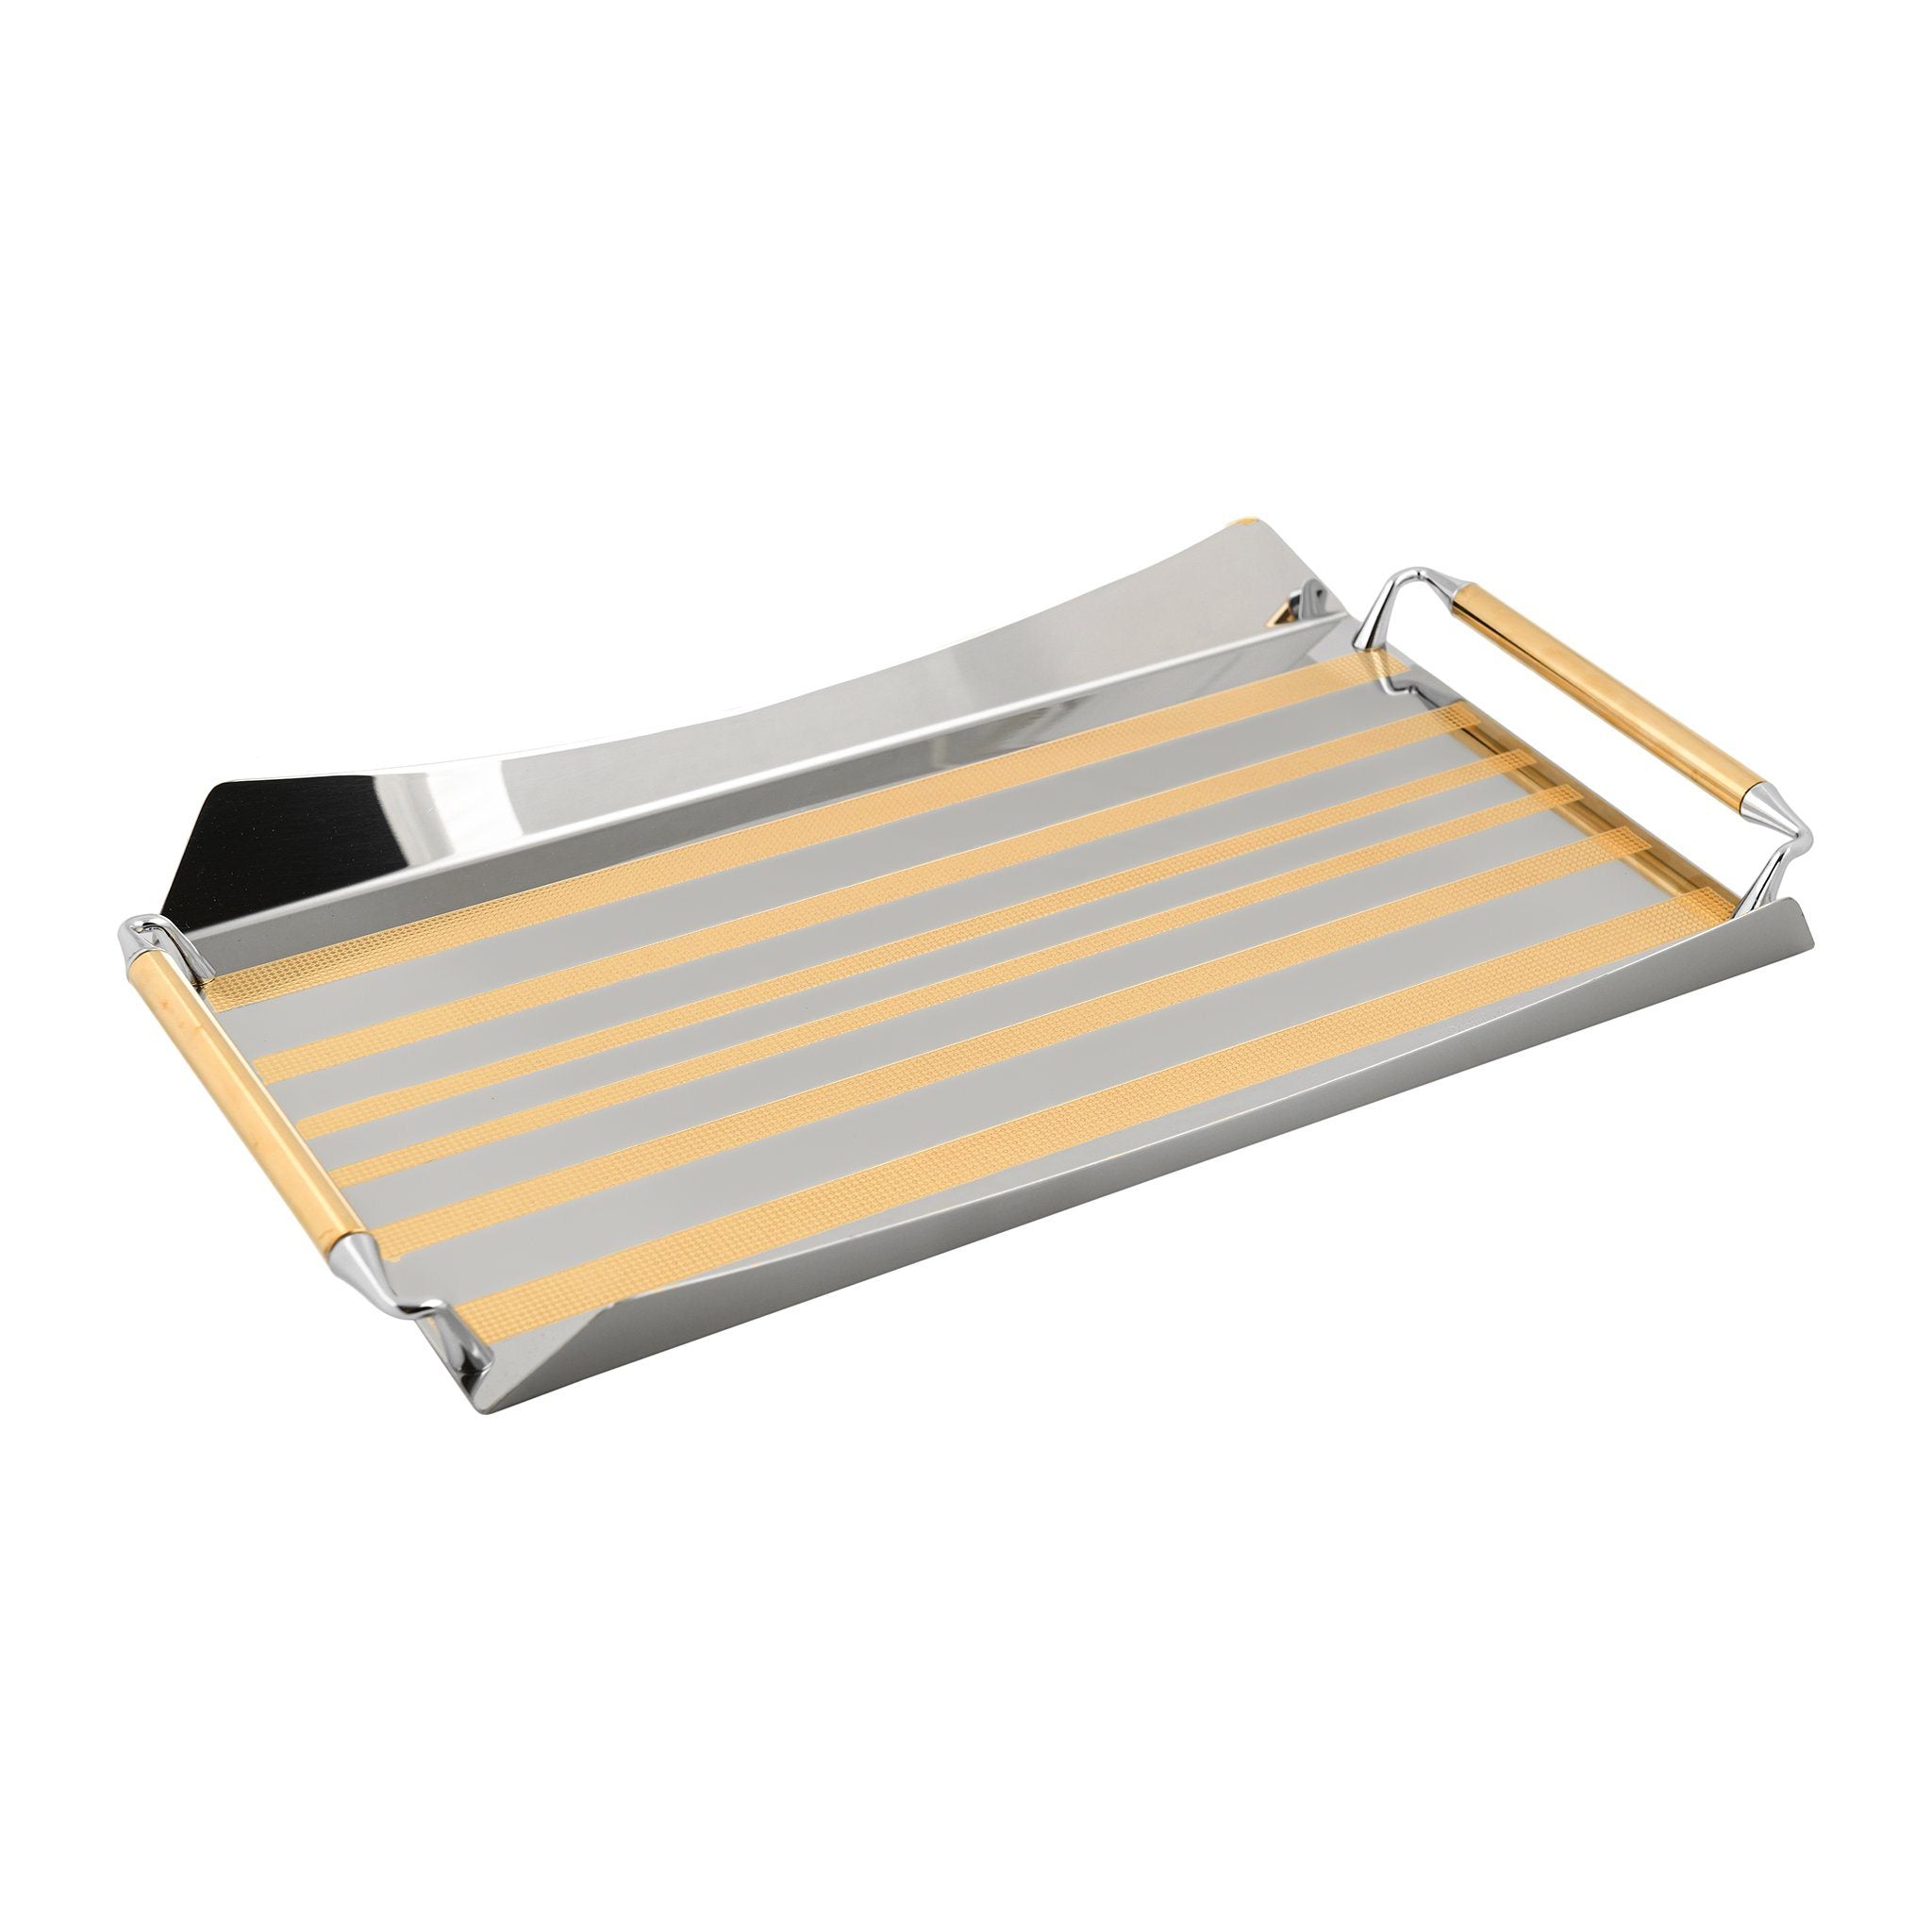 Elegant Gioiel - Rectangular Tray with Handles - Gold - Stainless Steel 18/10 - 45x30cm - 75000256